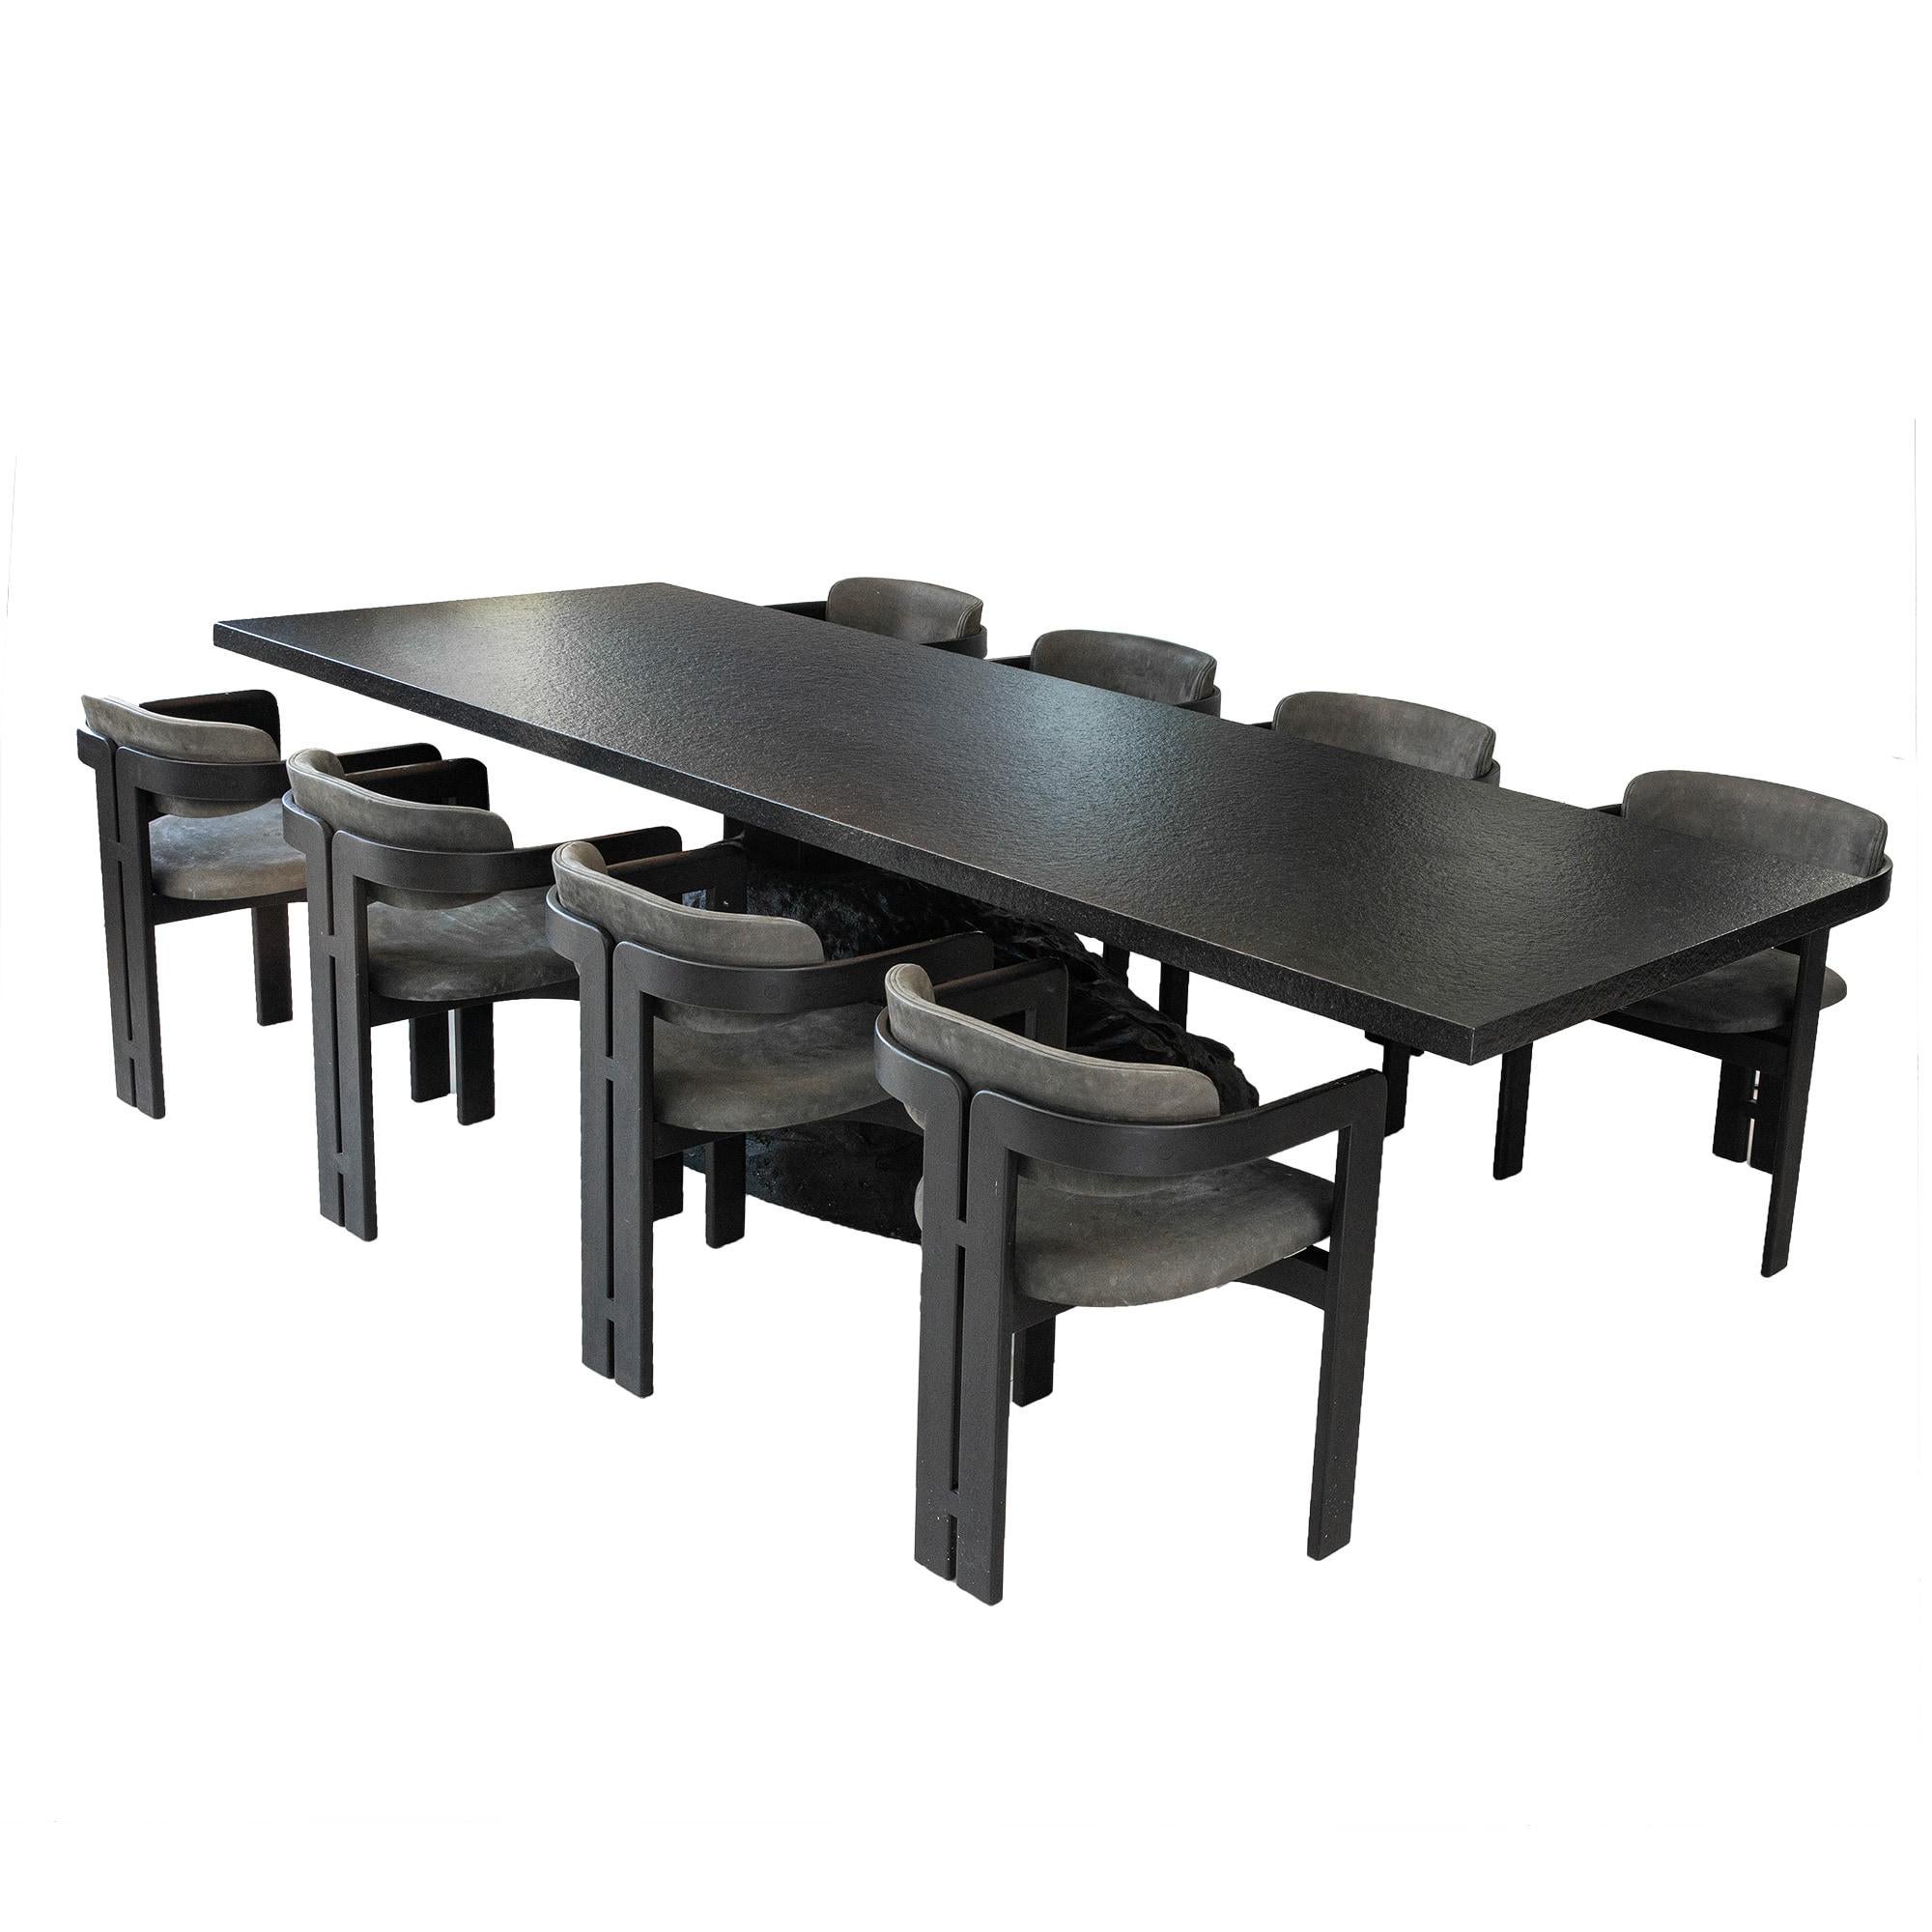 Custom dining table that seats 8 comfortably. Organic modern style. Custom designed, 1 of 1. Faux boulder with tabletop. Minor wear and tear associated with age and use. 